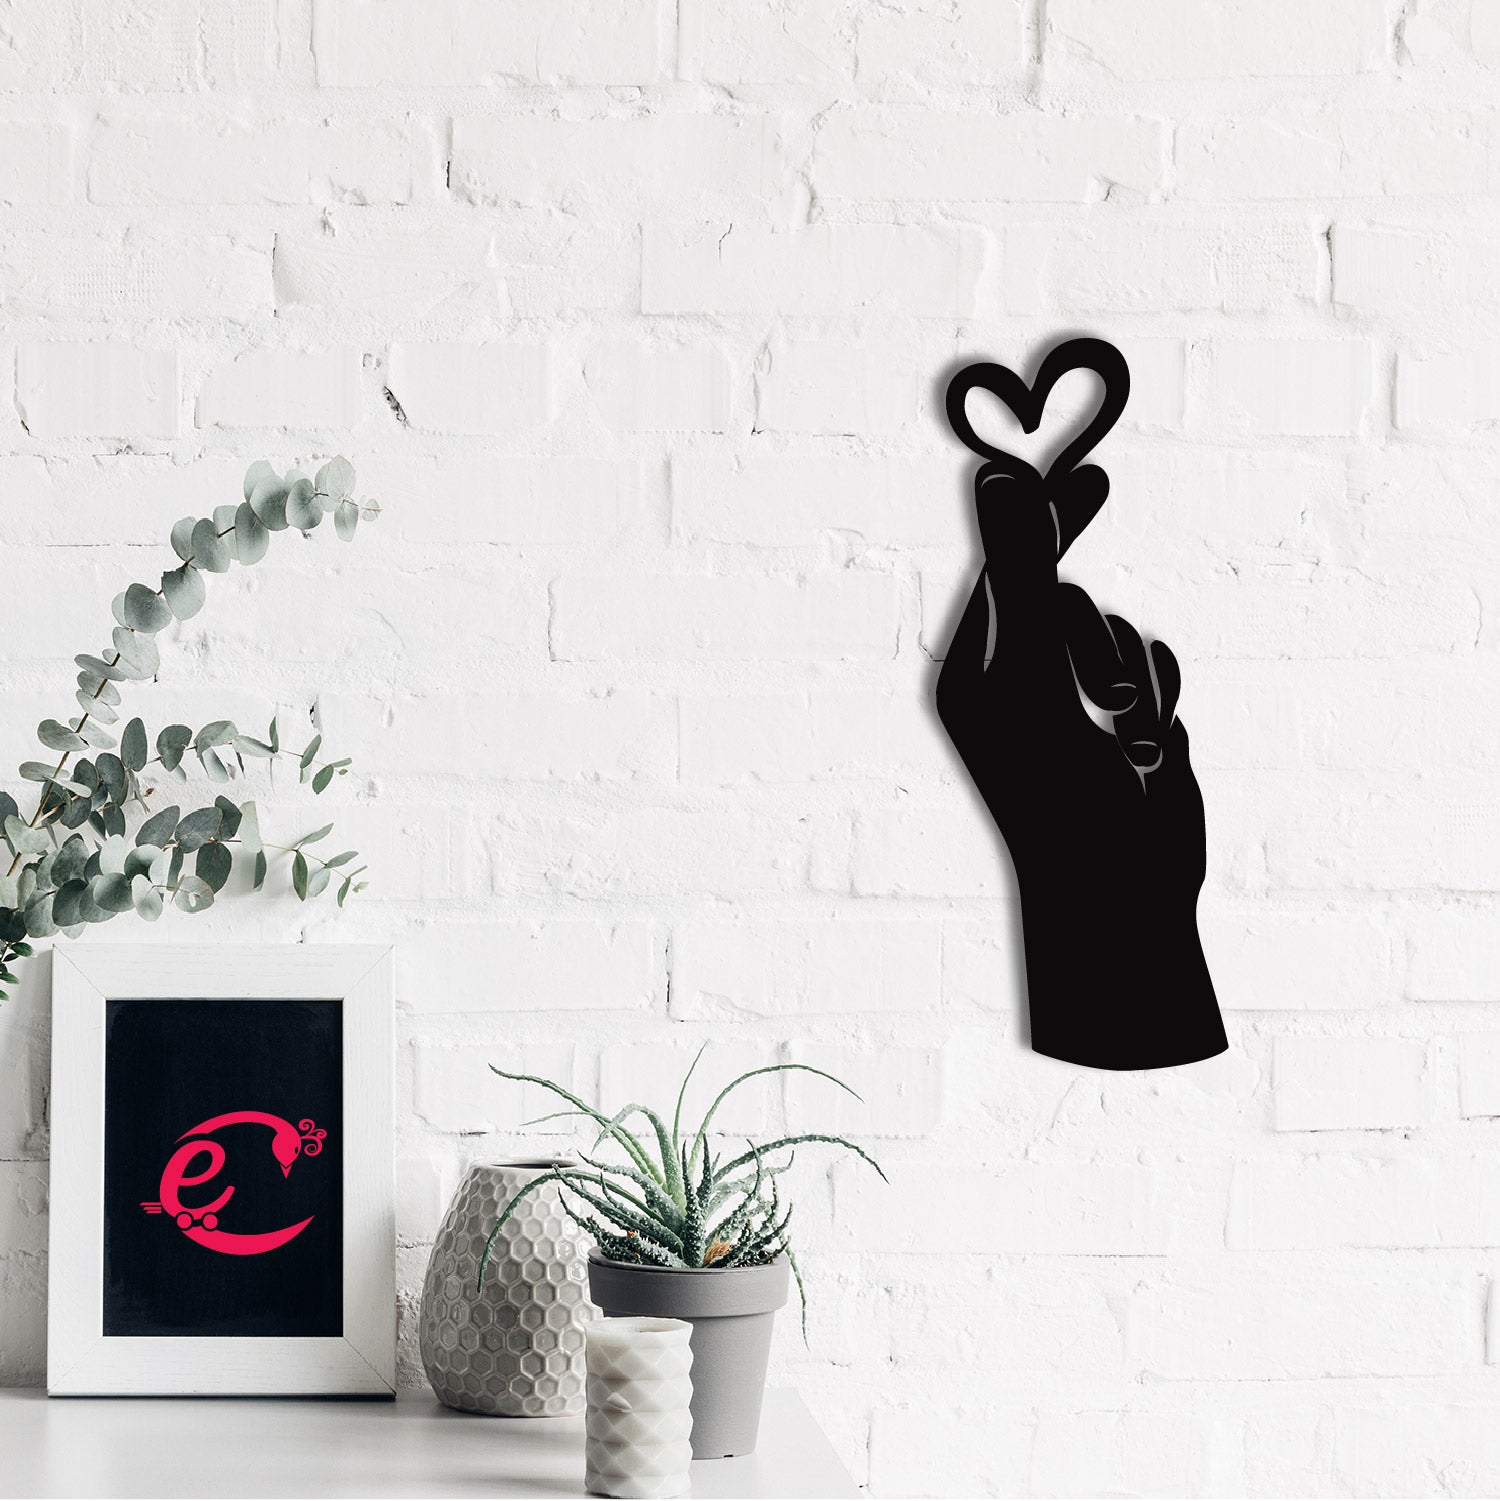 "Little Heart in Hand" Love Theme Black Engineered Wood Wall Art Cutout, Ready to Hang Home Decor